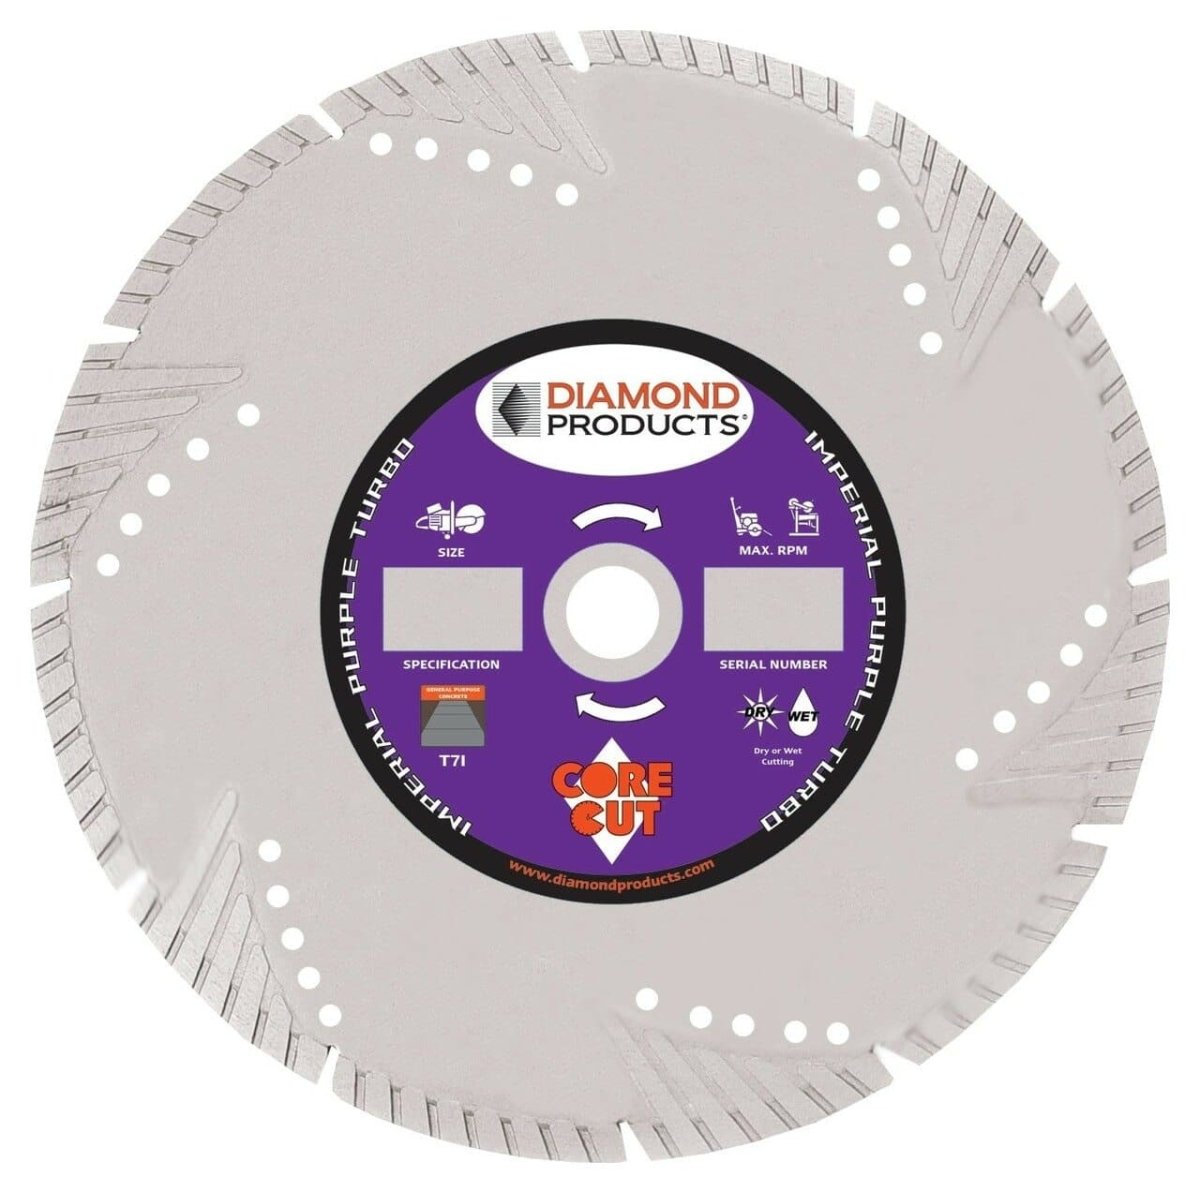 Imperial Purple High Speed Turbo Blade for Concrete - Diamond Products